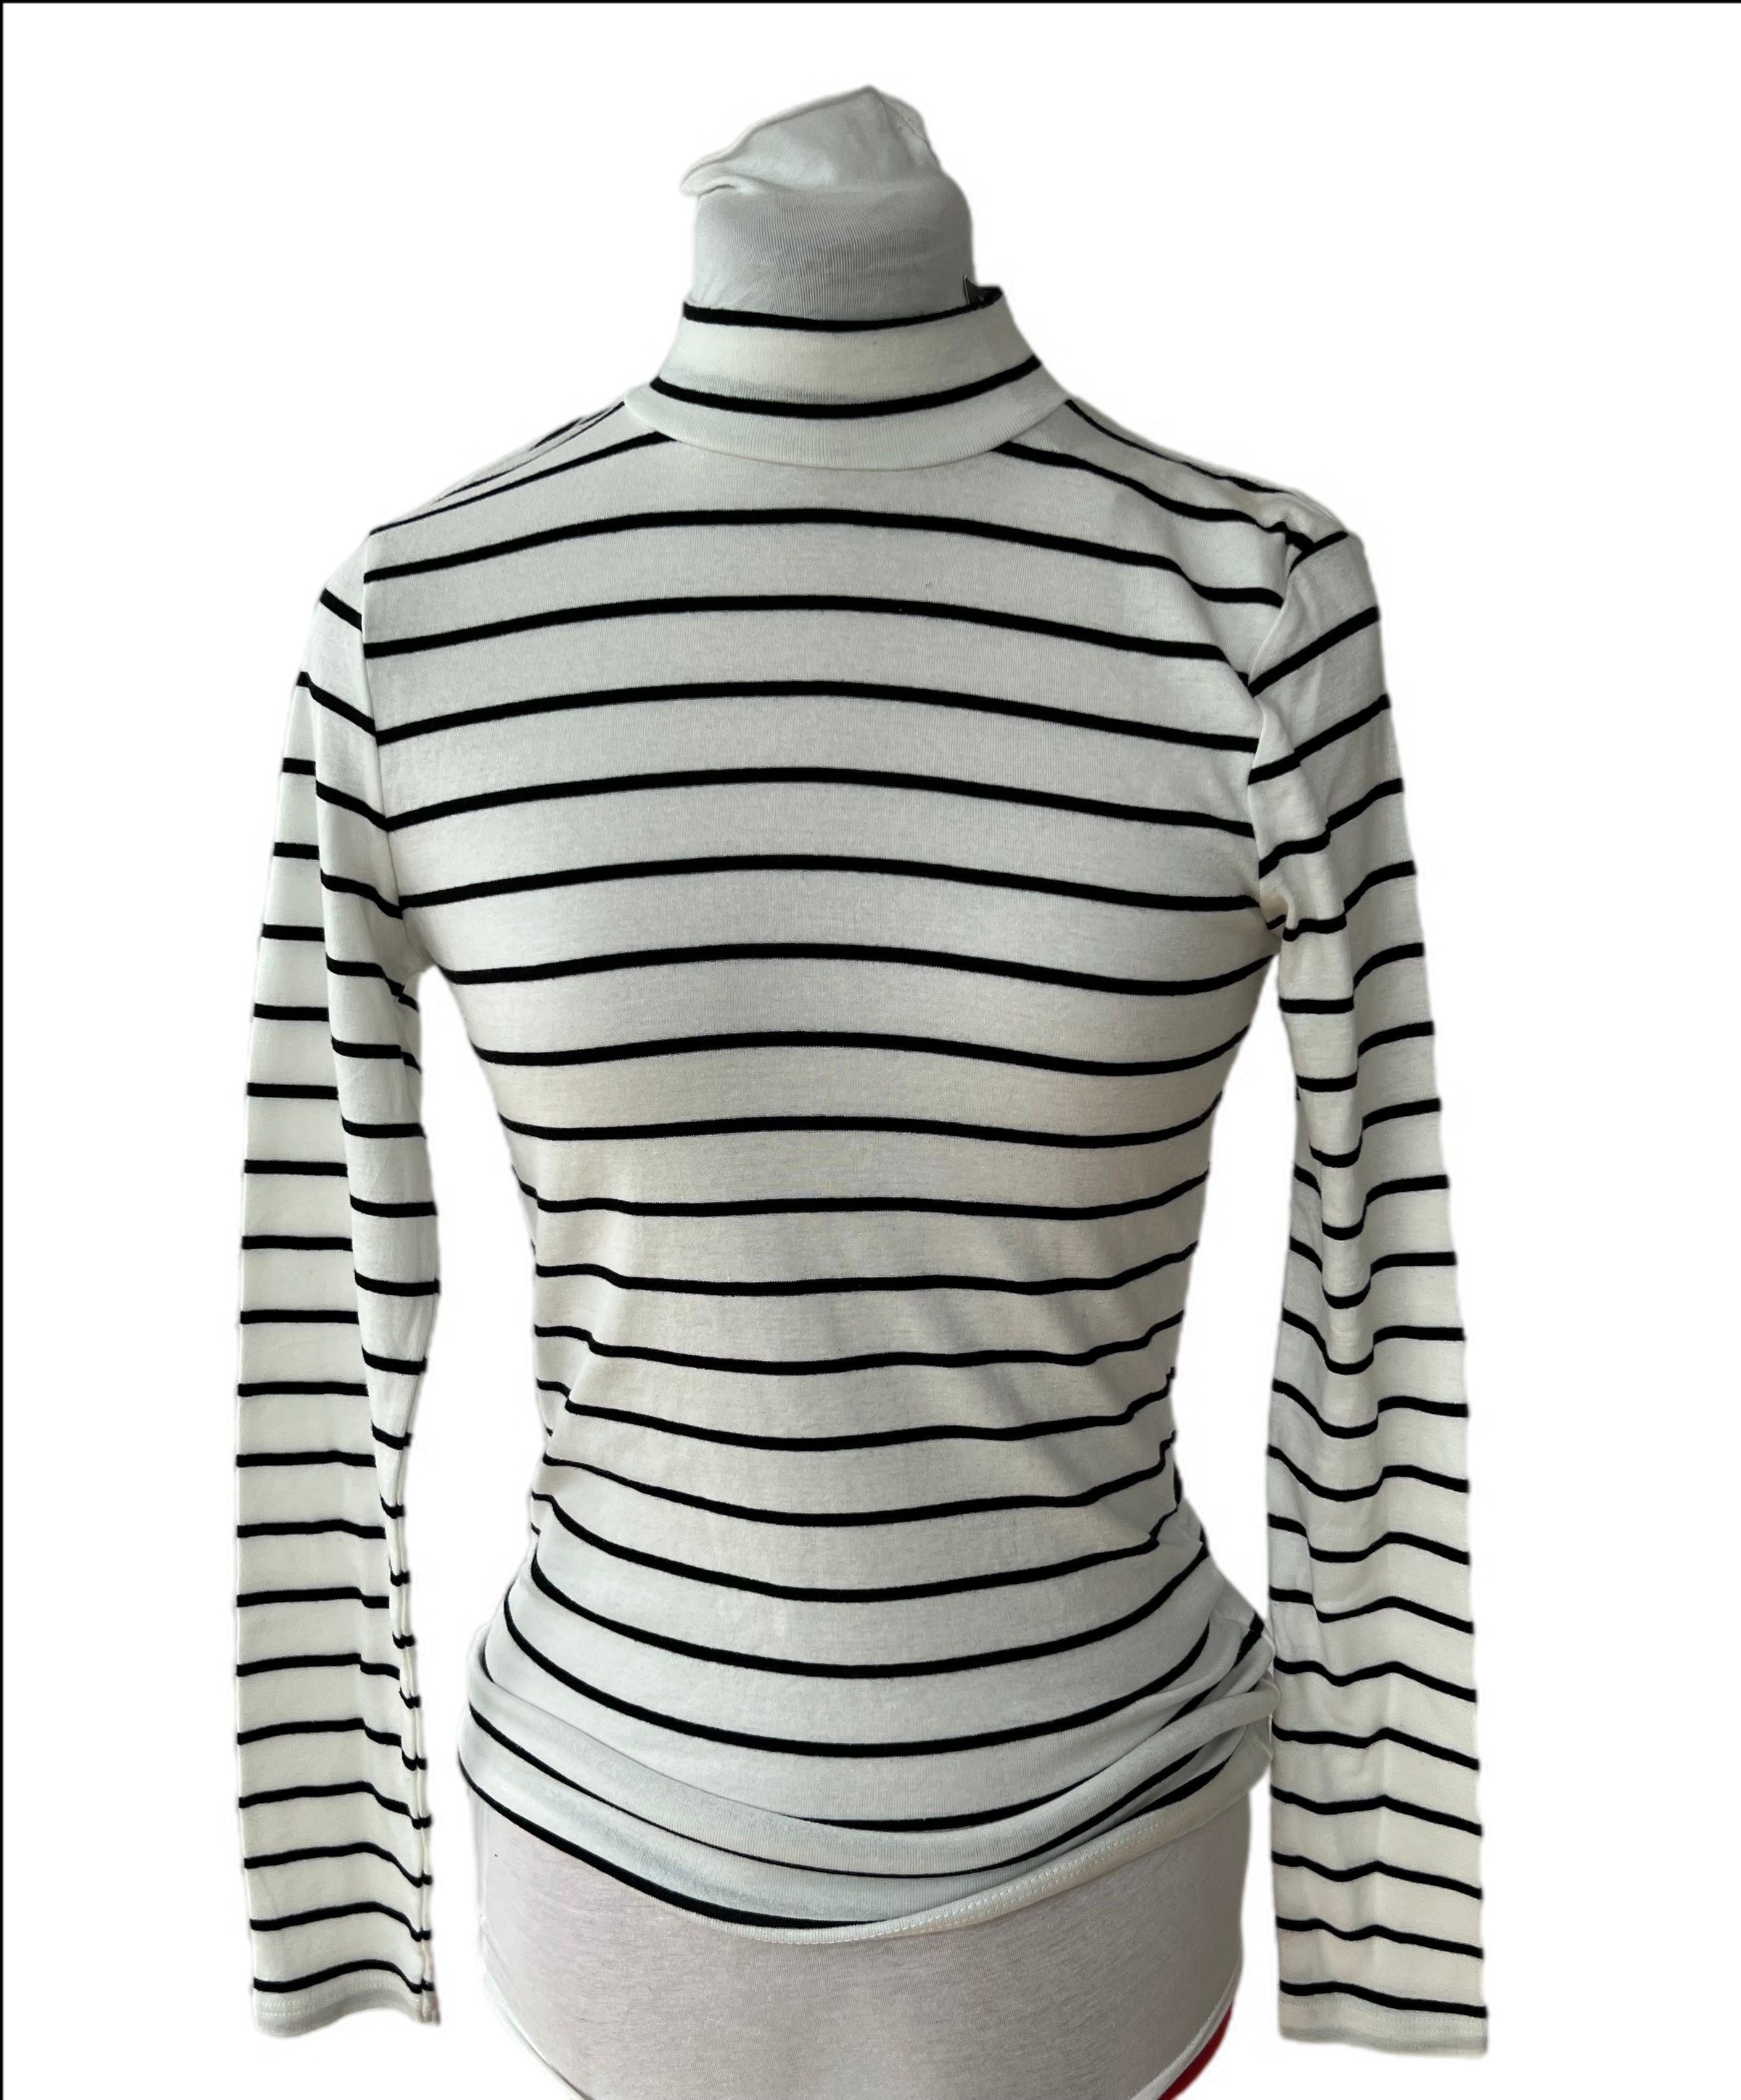 Long sleeve striped top